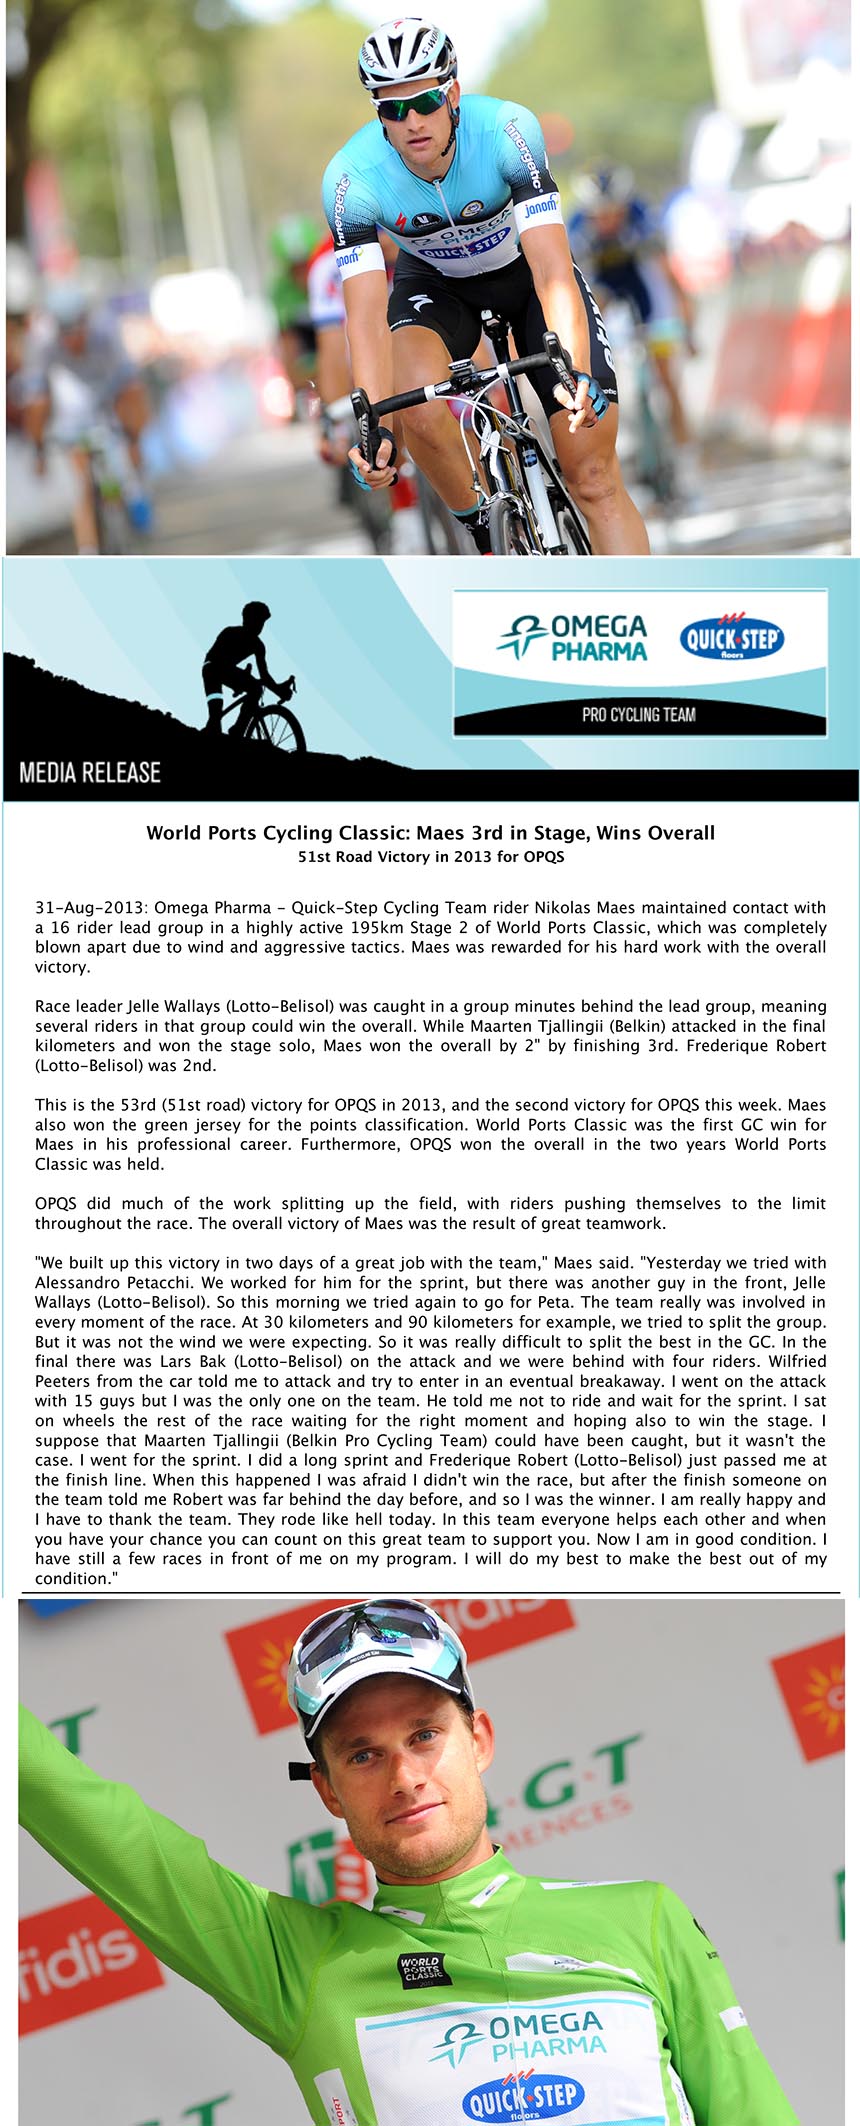 World Ports Cycling Classic: Maes 3rd in Stage, Wins Overall
51st Road Victory in 2013 for OPQS
31-Aug-2013: Omega Pharma - Quick-Step Cycling Team rider Nikolas Maes maintained contact with
a 16 rider lead group in a highly active 195km Stage 2 of World Ports Classic, which was completely
blown apart due to wind and aggressive tactics. Maes was rewarded for his hard work with the overall
victory.
Race leader Jelle Wallays (Lotto-Belisol) was caught in a group minutes behind the lead group, meaning
several riders in that group could win the overall. While Maarten Tjallingii (Belkin) attacked in the final
kilometers and won the stage solo, Maes won the overall by 2" by finishing 3rd. Frederique Robert
(Lotto-Belisol) was 2nd.
This is the 53rd (51st road) victory for OPQS in 2013, and the second victory for OPQS this week. Maes
also won the green jersey for the points classification. World Ports Classic was the first GC win for
Maes in his professional career. Furthermore, OPQS won the overall in the two years World Ports
Classic was held.
OPQS did much of the work splitting up the field, with riders pushing themselves to the limit
throughout the race. The overall victory of Maes was the result of great teamwork.
"We built up this victory in two days of a great job with the team," Maes said. "Yesterday we tried with
Alessandro Petacchi. We worked for him for the sprint, but there was another guy in the front, Jelle
Wallays (Lotto-Belisol). So this morning we tried again to go for Peta. The team really was involved in
every moment of the race. At 30 kilometers and 90 kilometers for example, we tried to split the group.
But it was not the wind we were expecting. So it was really difficult to split the best in the GC. In the
final there was Lars Bak (Lotto-Belisol) on the attack and we were behind with four riders. Wilfried
Peeters from the car told me to attack and try to enter in an eventual breakaway. I went on the attack
with 15 guys but I was the only one on the team. He told me not to ride and wait for the sprint. I sat
on wheels the rest of the race waiting for the right moment and hoping also to win the stage. I
suppose that Maarten Tjallingii (Belkin Pro Cycling Team) could have been caught, but it wasn't the
case. I went for the sprint. I did a long sprint and Frederique Robert (Lotto-Belisol) just passed me at
the finish line. When this happened I was afraid I didn't win the race, but after the finish someone on
the team told me Robert was far behind the day before, and so I was the winner. I am really happy and
I have to thank the team. They rode like hell today. In this team everyone helps each other and when
you have your chance you can count on this great team to support you. Now I am in good condition. I
have still a few races in front of me on my program. I will do my best to make the best out of my
condition."
Media Note:
For more media information please visit the Media Center.
Alessandro Tegner | Press Officer
Image credits
Maes WPC 1.jpg - OPQS/Tim de Waele
Maes WPC 2.jpg - OPQS/Tim de Waele
Omega Pharma Quick-Step Cycling Team PR <tegner@decolef.com>
A: redazione@bikenews.it
Media Release: World Ports Cycling Classic: Maes 3rd in Stage, Wins Overall
31 agosto 2013 17:04
2 allegati, 1,6 MB